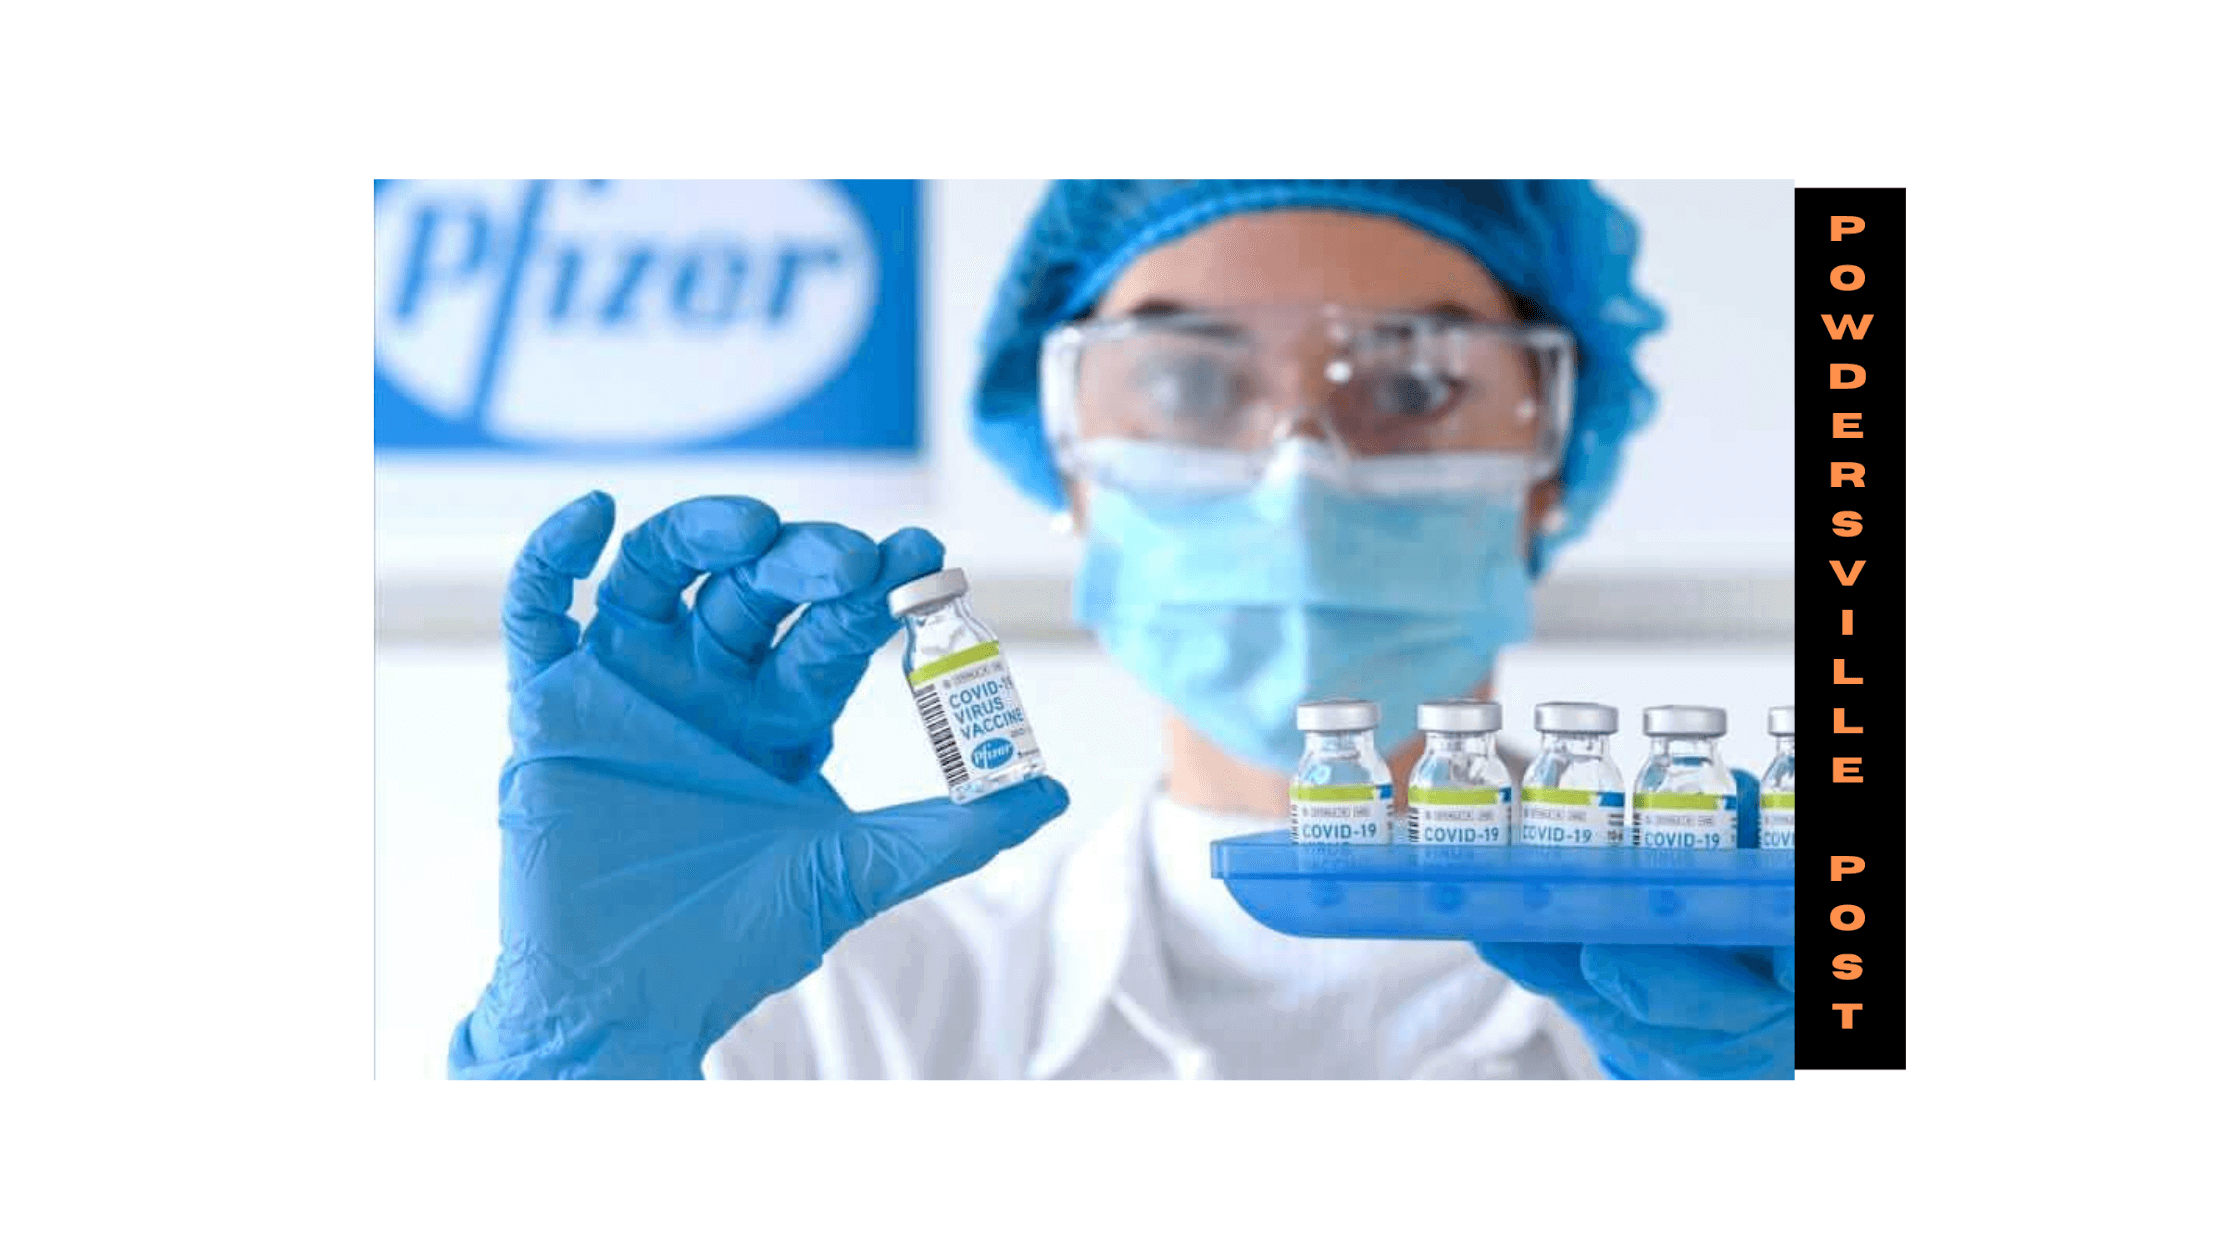 The clinical trials will be conducted by Pfizer on variant-specific vaccines for the citizens